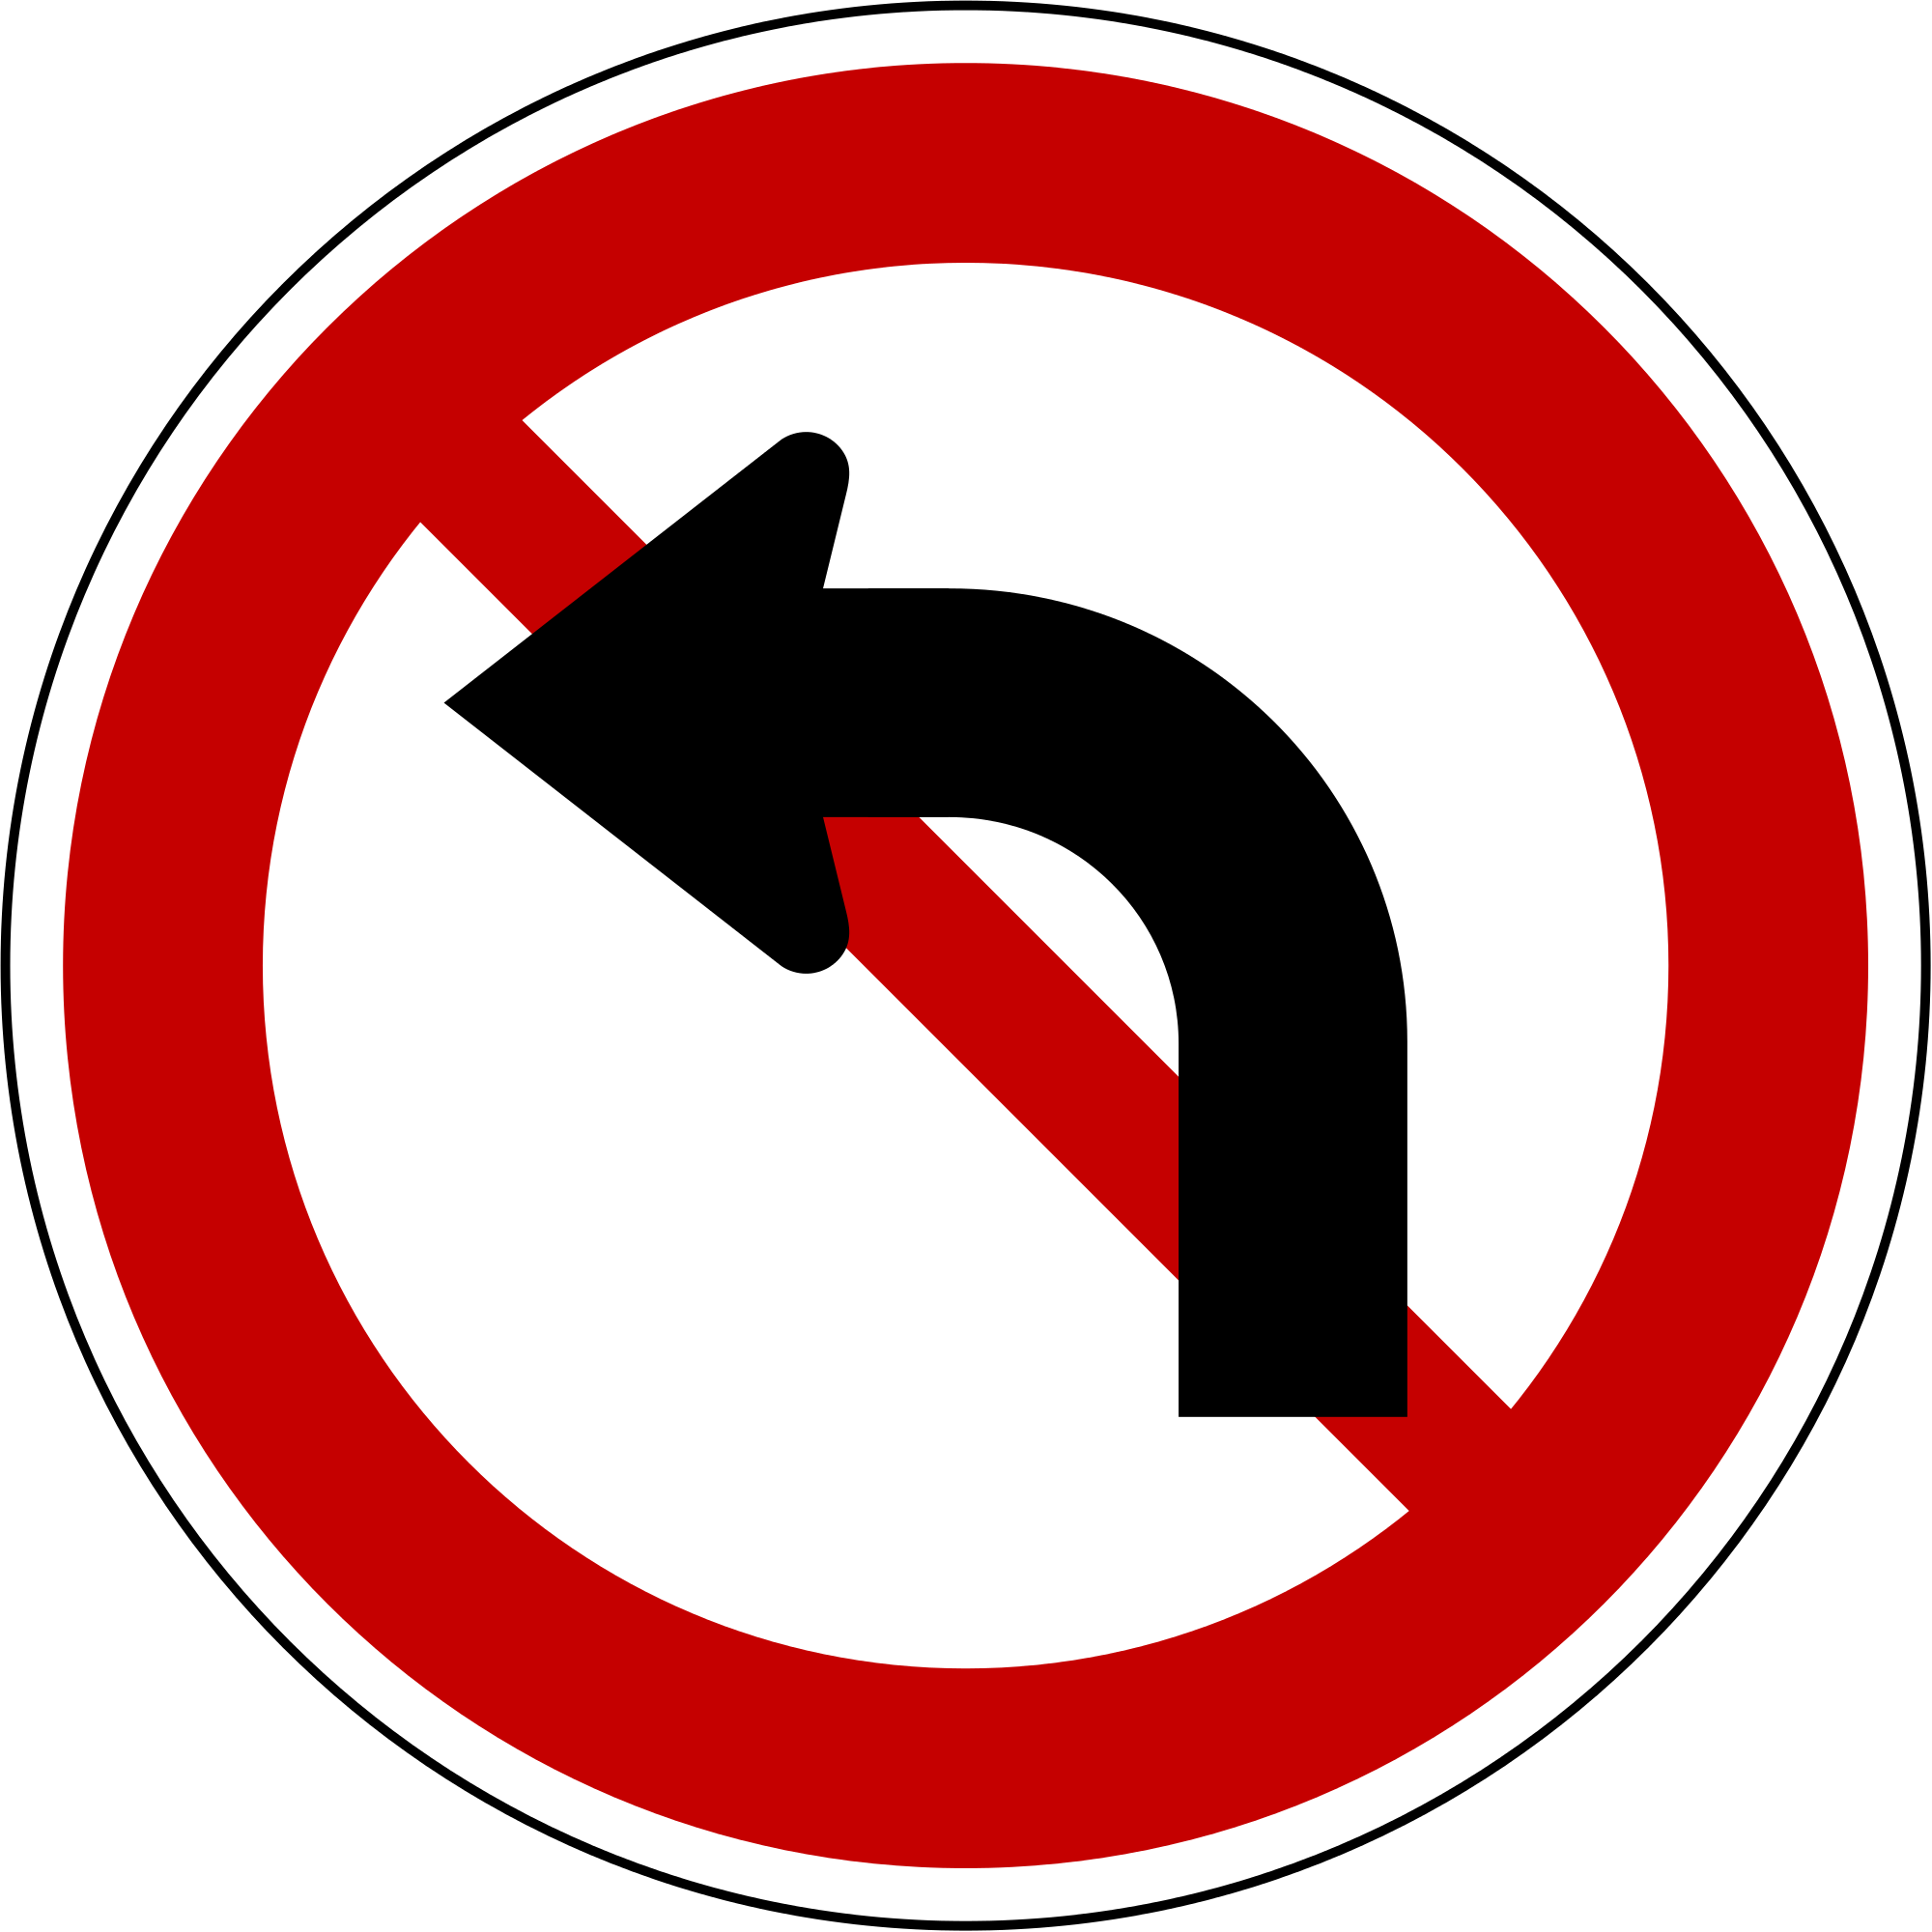 Open - No Left Turn Traffic Sign (2000x2000)